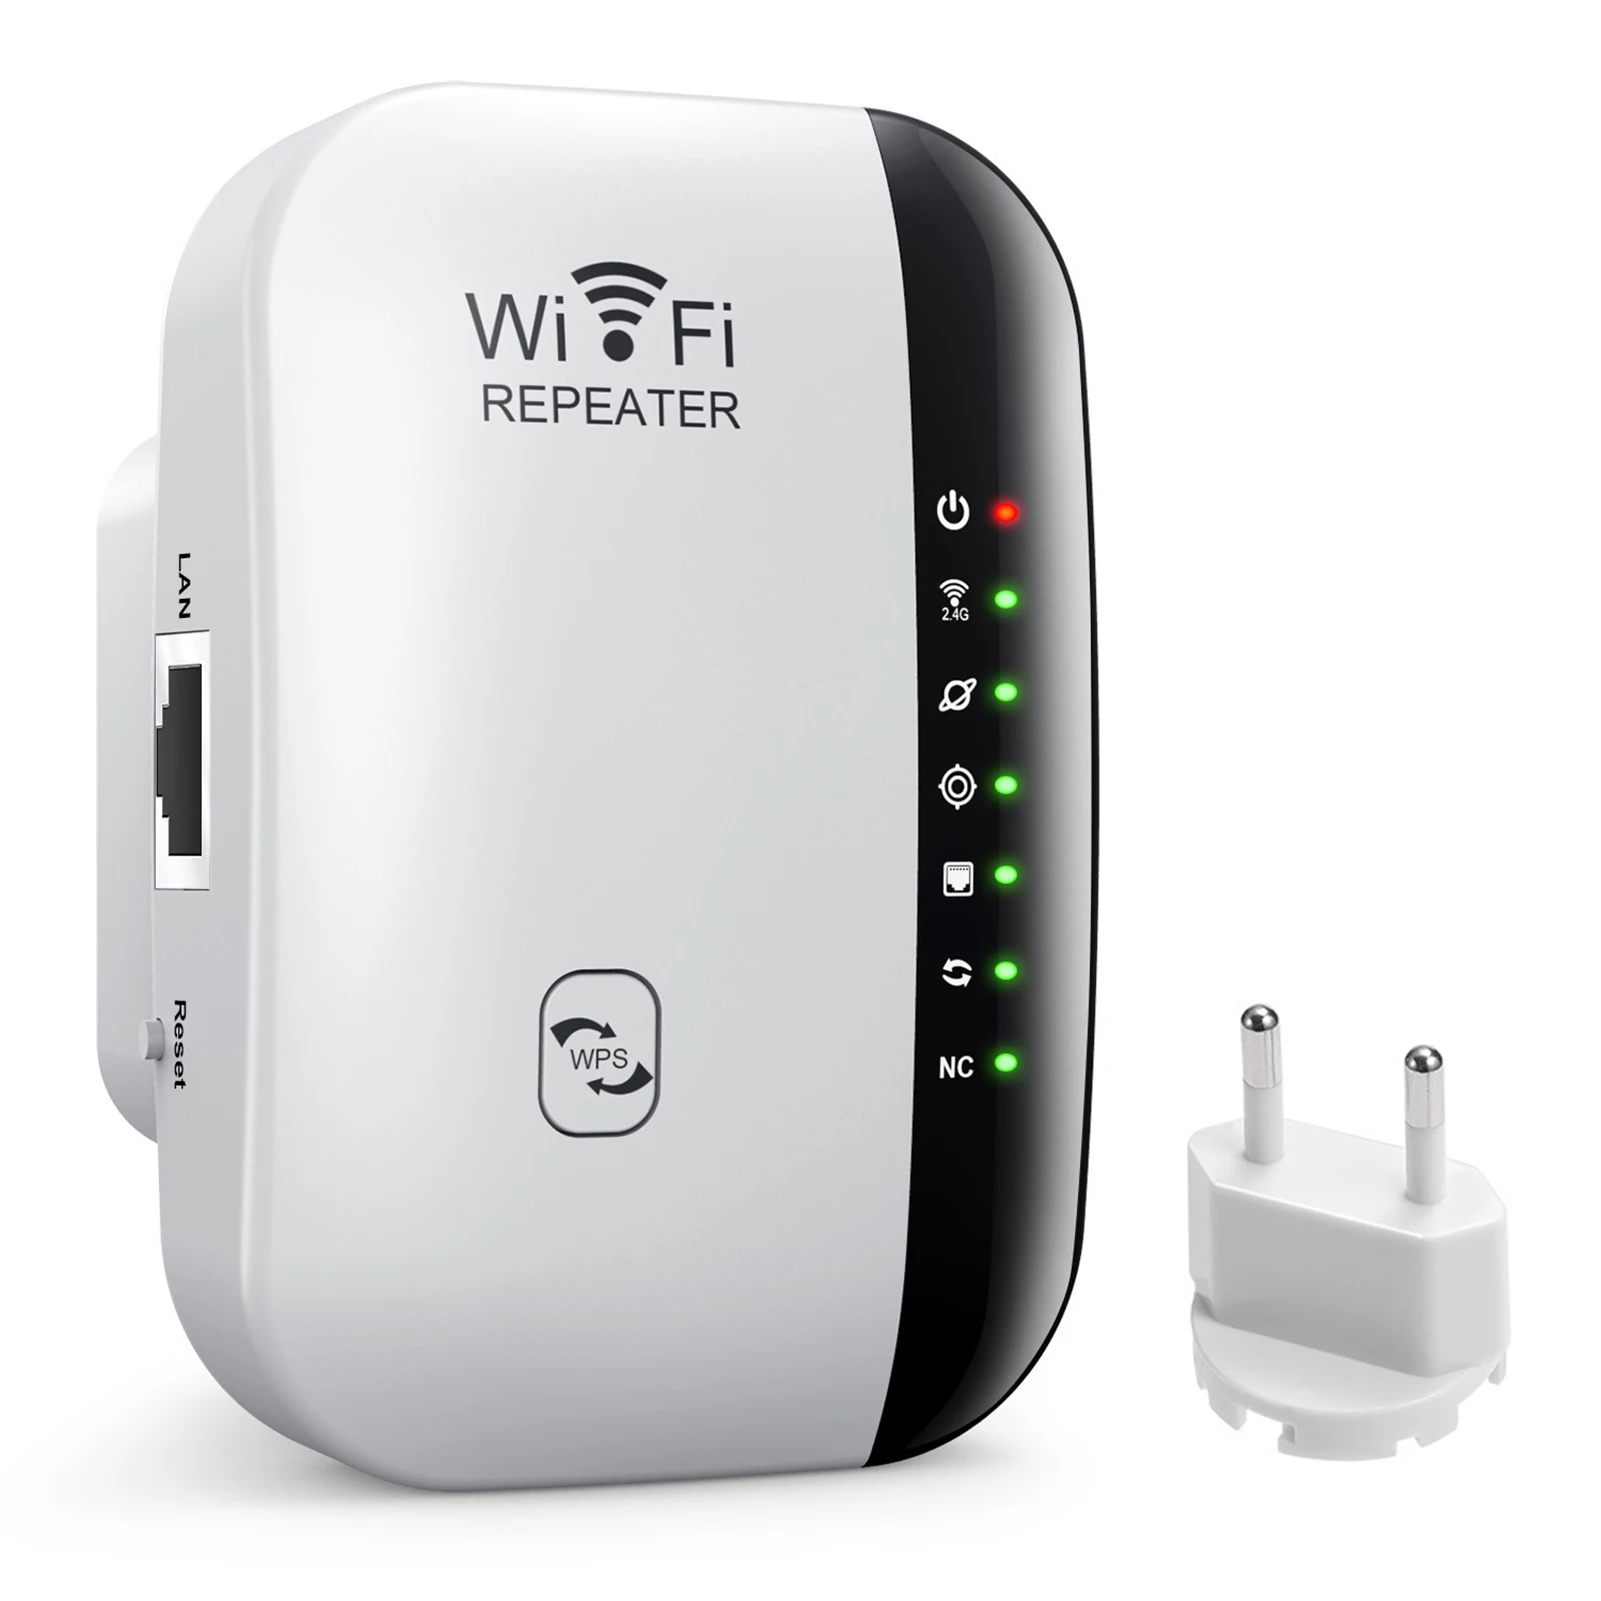 Te voet Lang Validatie Draadloze Wifi Repeater Wifi Range Extender Router Wi fi Signaal Versterker  300Mbps Wifi Booster 2.4G Wi fi Reapeter access Point|Draadloze Router| -  AliExpress